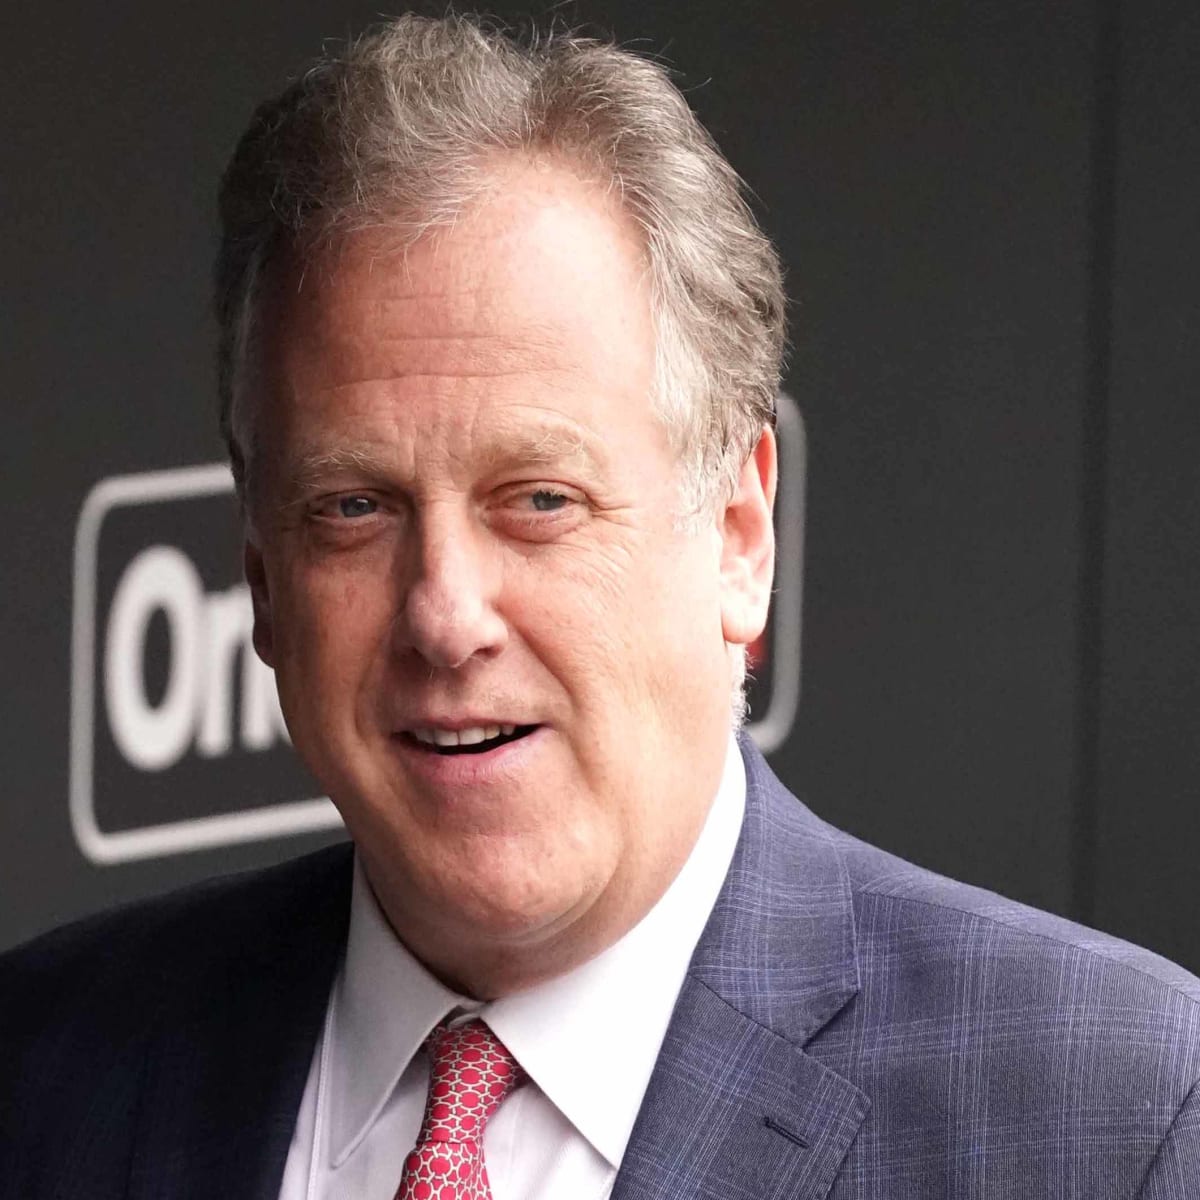 Q&A with Michael Kay, Voice of the Yankees